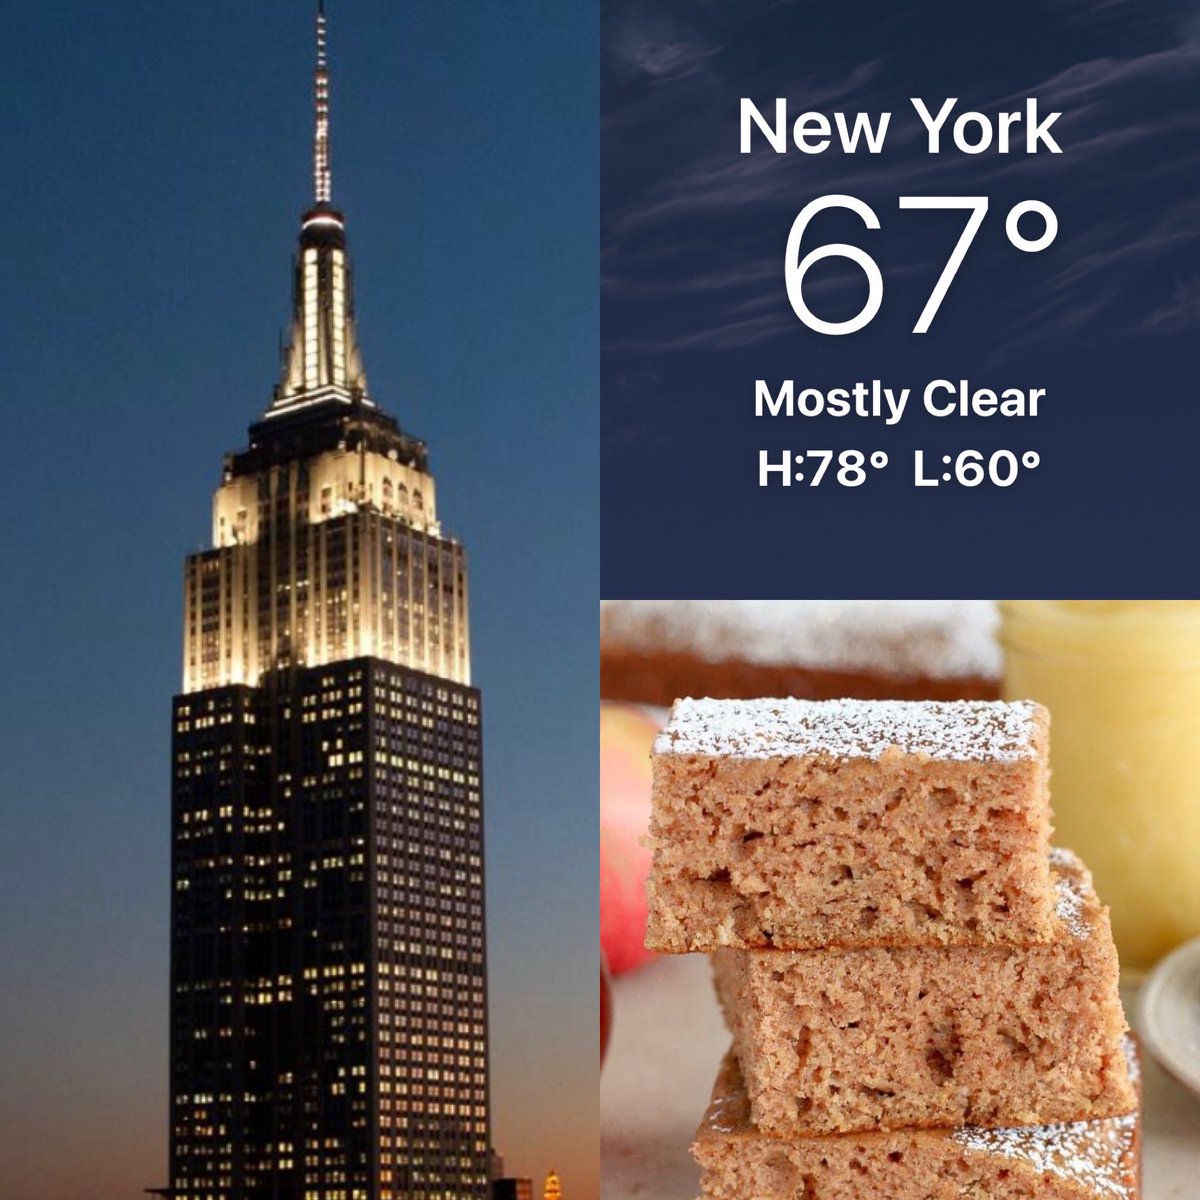 Sunset was at 8:24PM as #NYers are staying indoors tonight with an Air Quality Alert in effect as winds bring smoke from wildfires in Canada! The @EmpireStateBldg is lit in Signature White & #CakeLovers celebrate #NationalApplesauceCskeDay🍎 @NationalDayCal @NY1weather